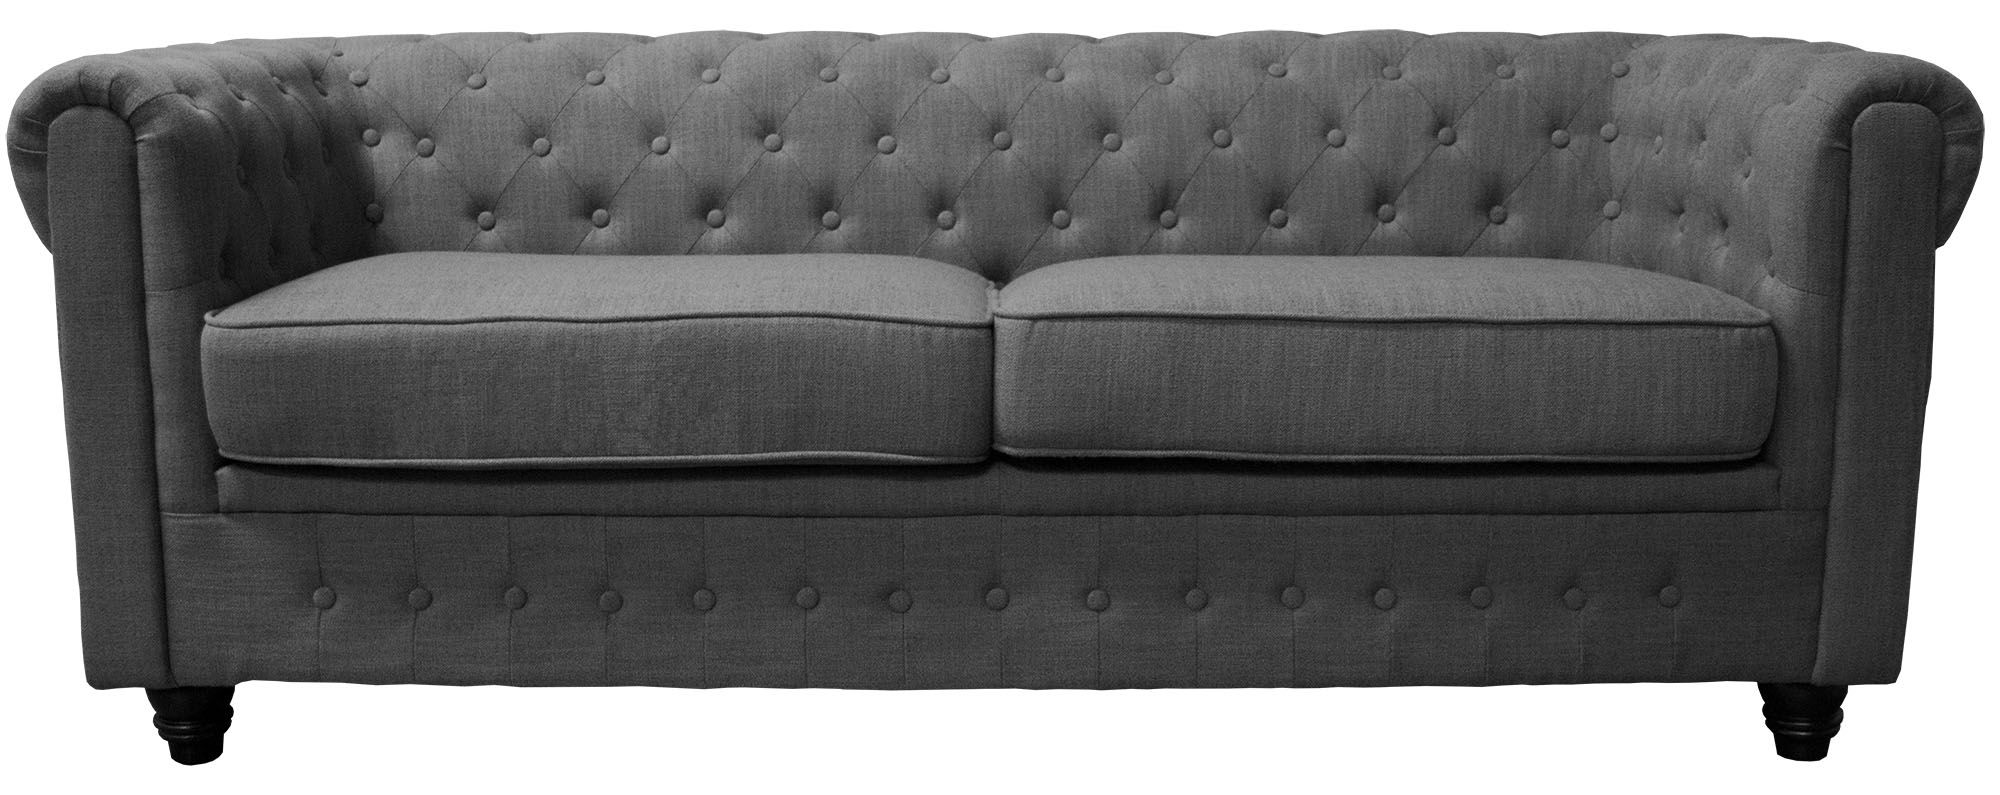 Light Charcoal Linen Sofas With Regard To Most Recent Cambridge Sofa – Charcoal Linen – Designer (View 15 of 15)